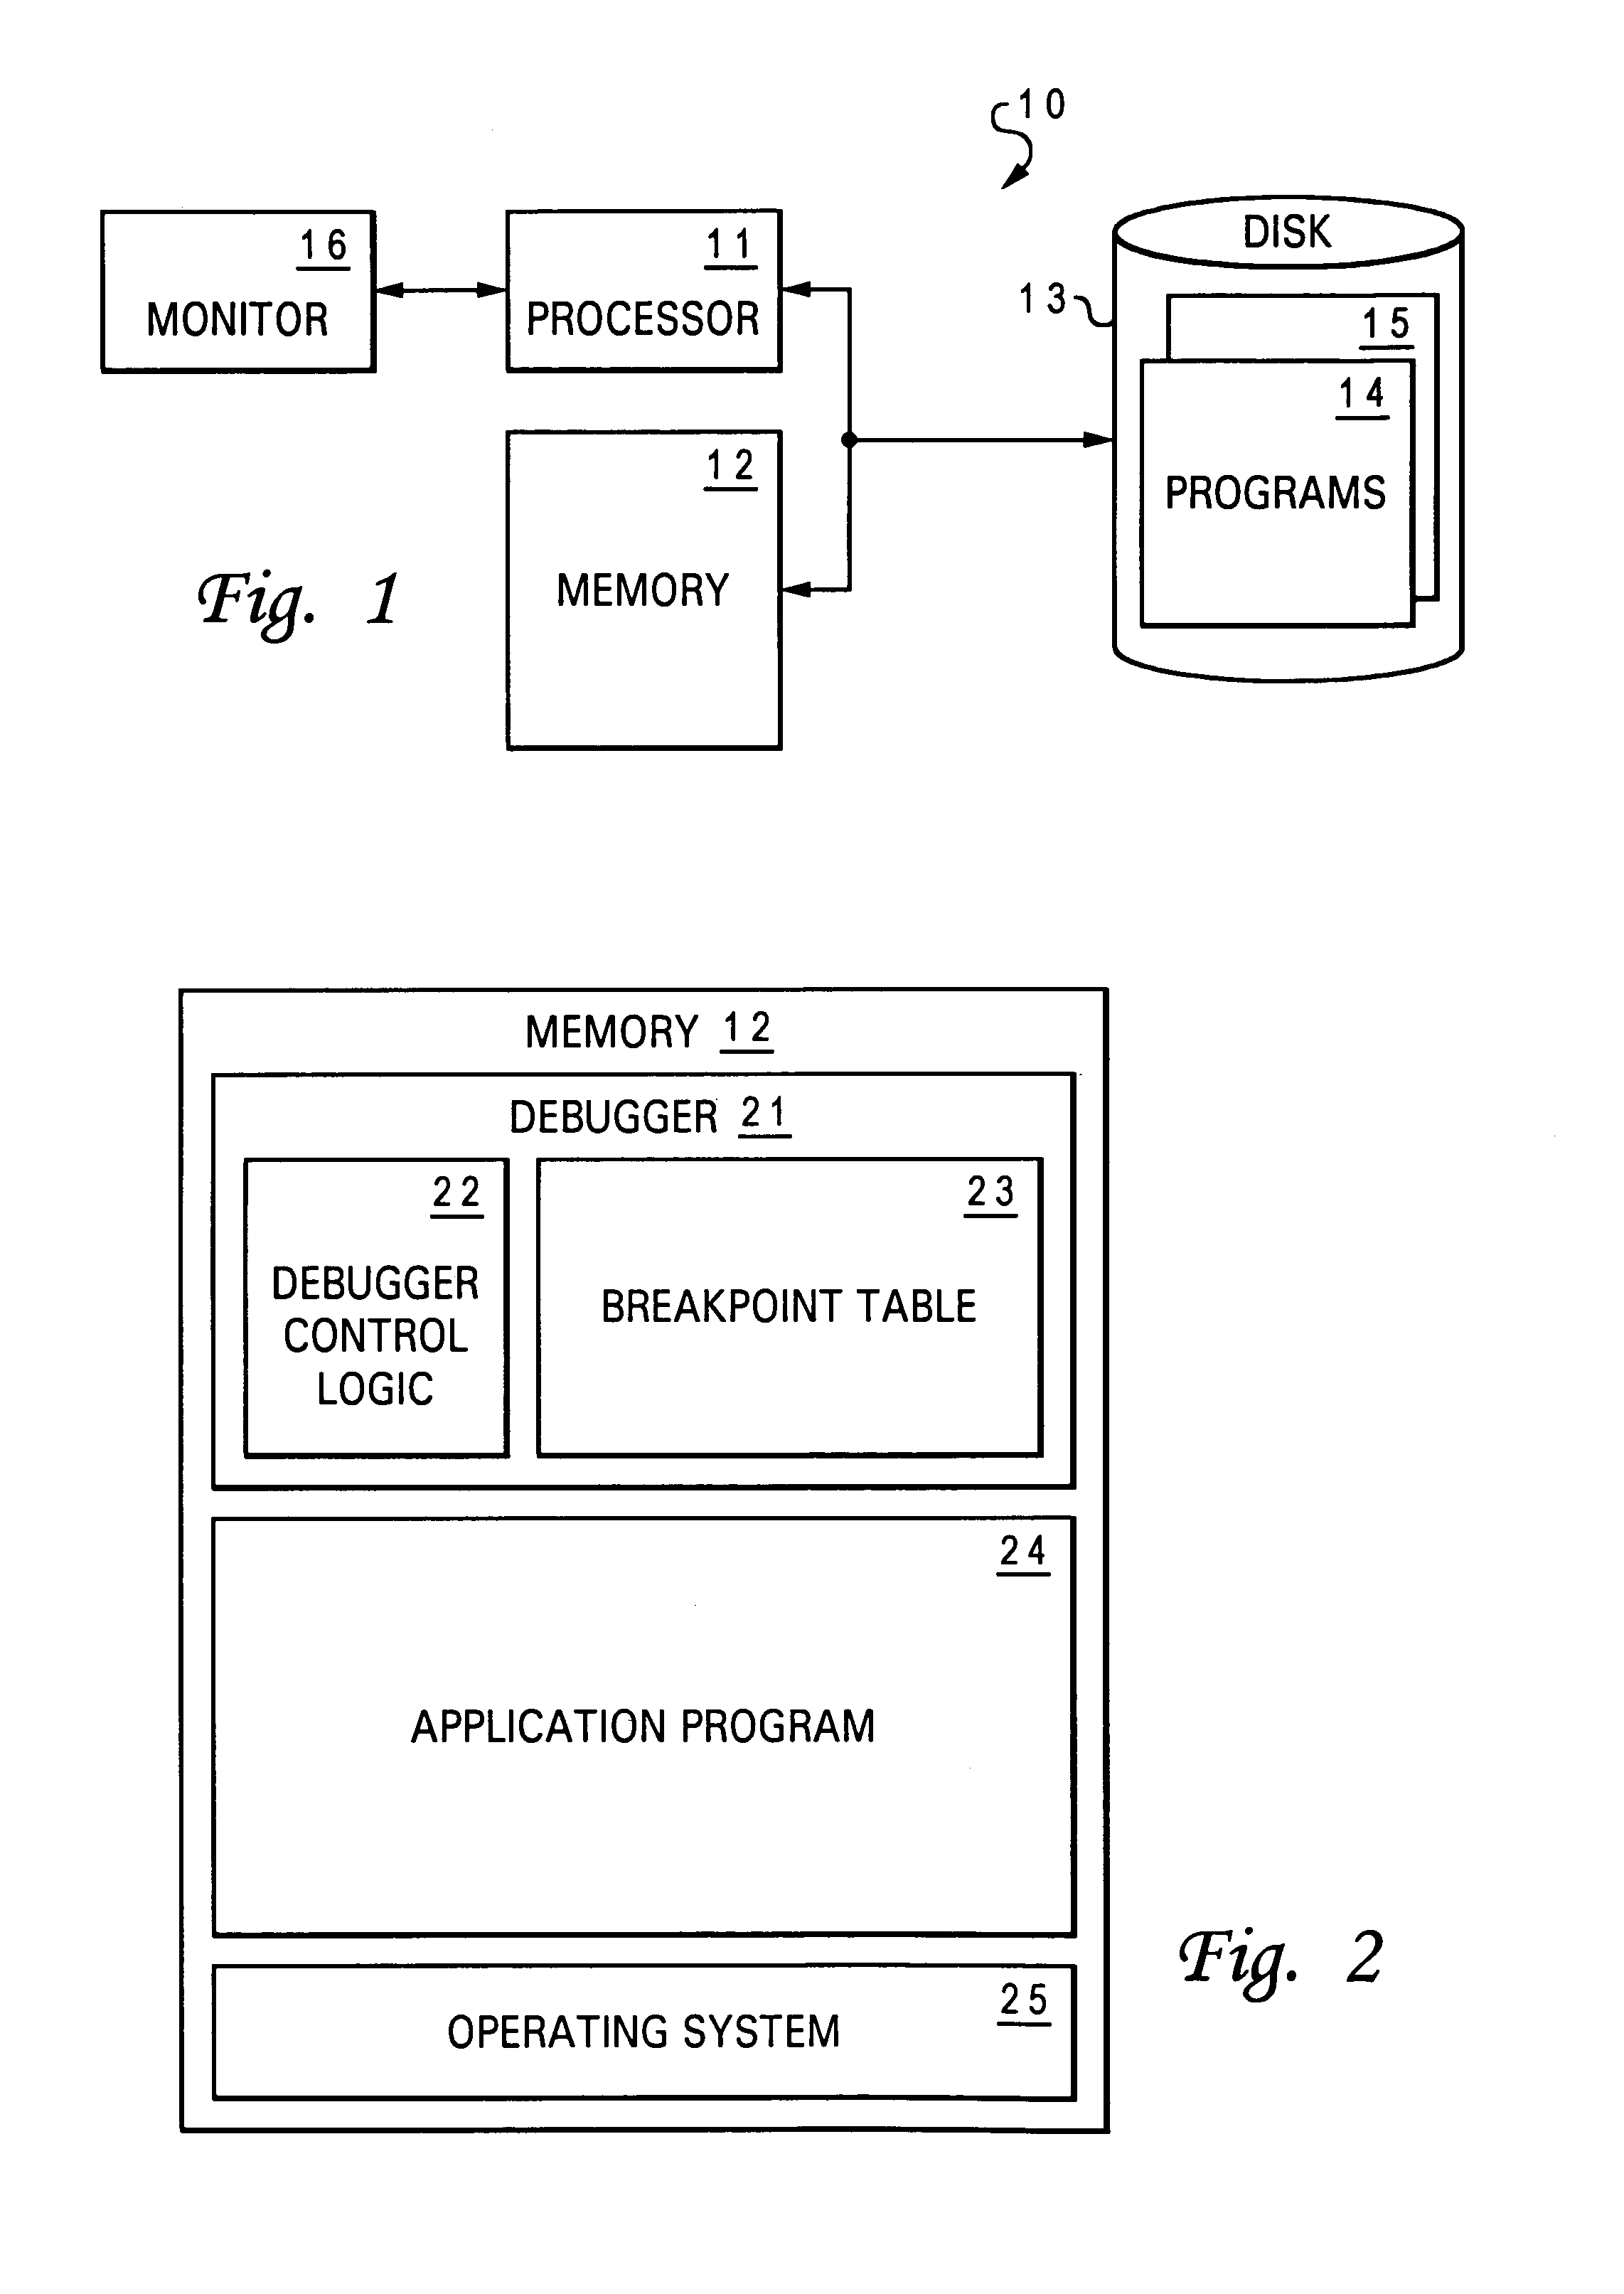 Software debugger having a monitor for monitoring conditional statements within a software program